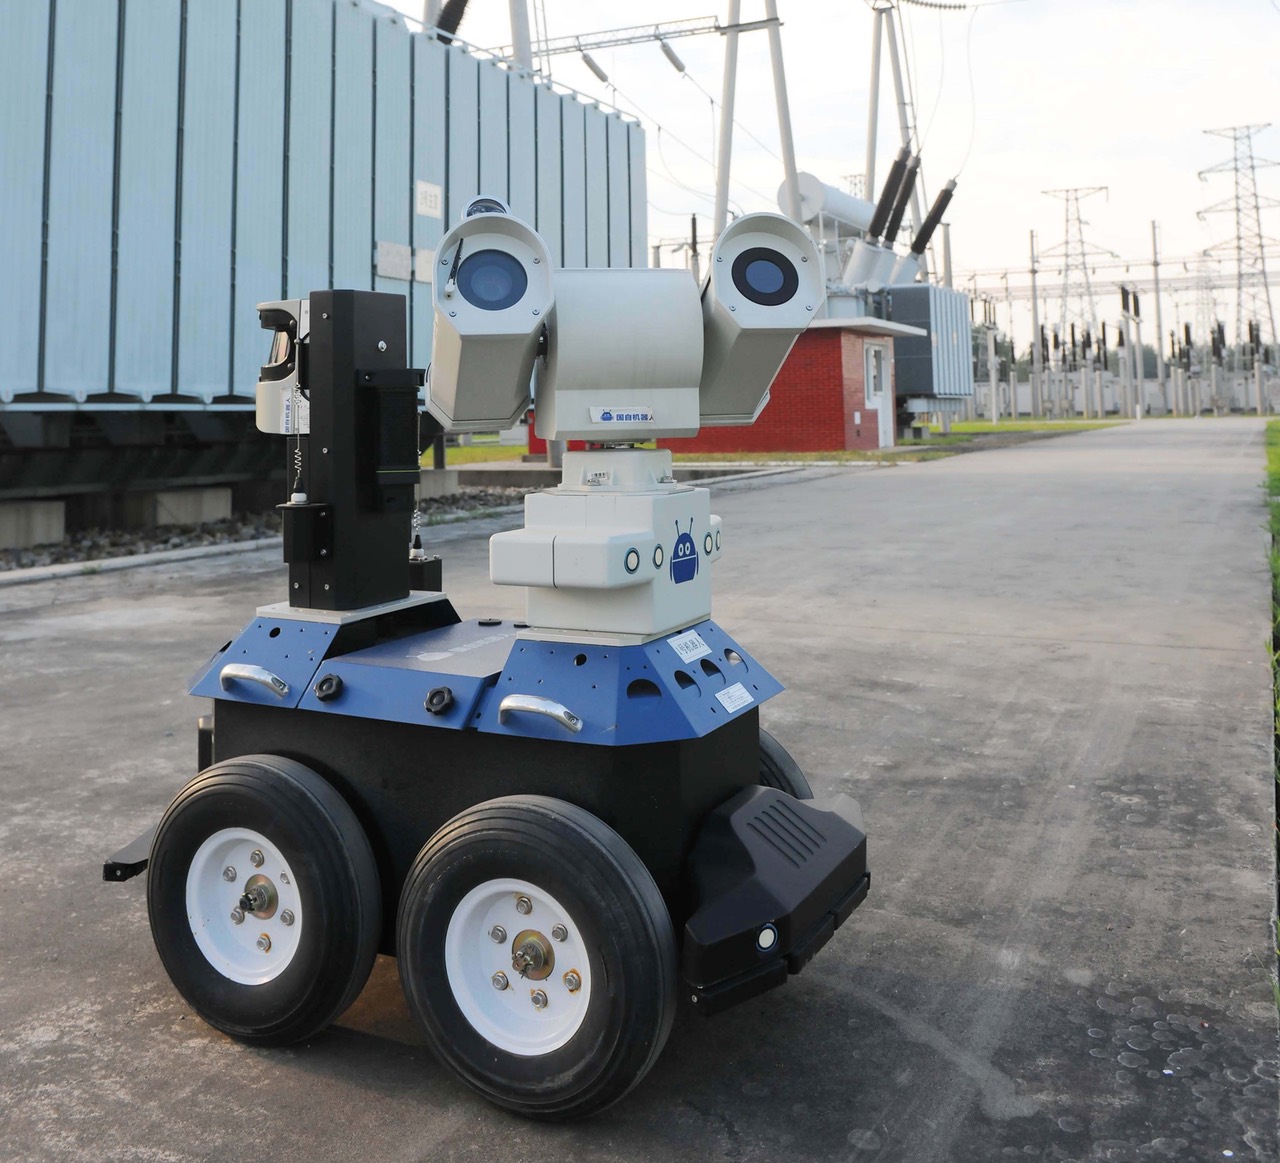 Will This Adorable Patrol Robot Ever Find What It’s Looking For?